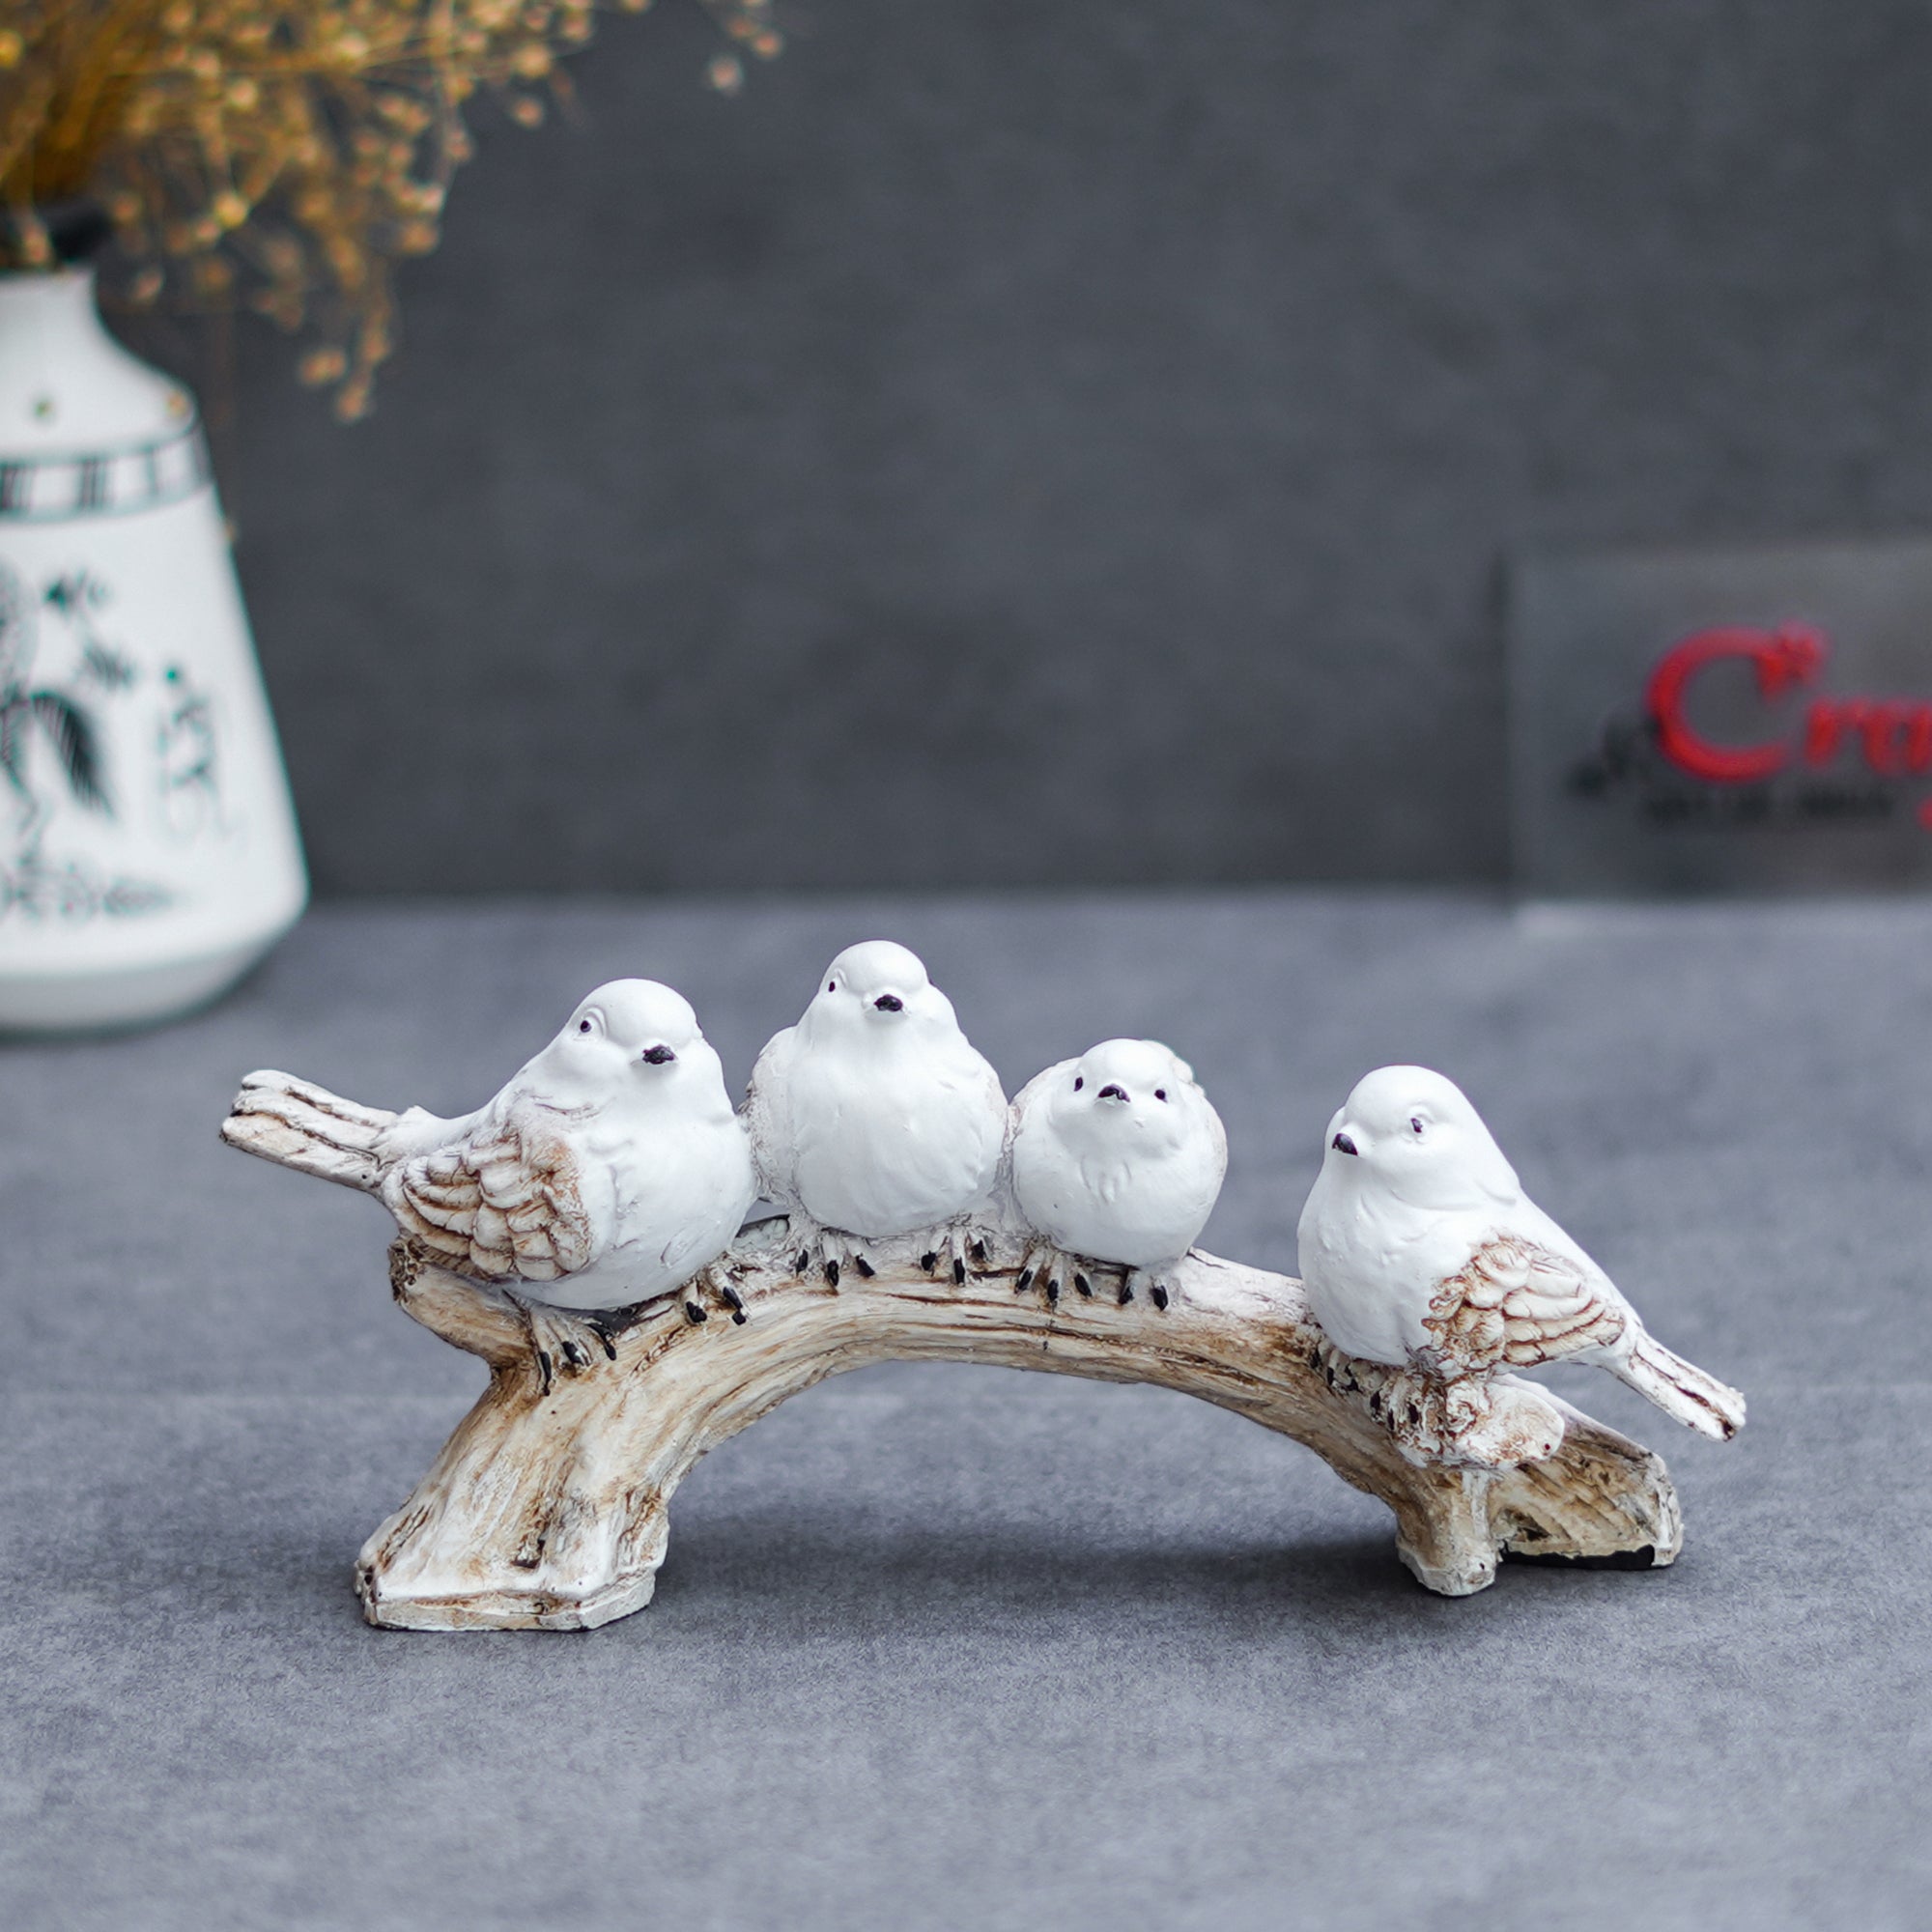 Polyresin Handcrafted 4 White Bird Statues Sitting on Tree Branch Decorative Showpiece